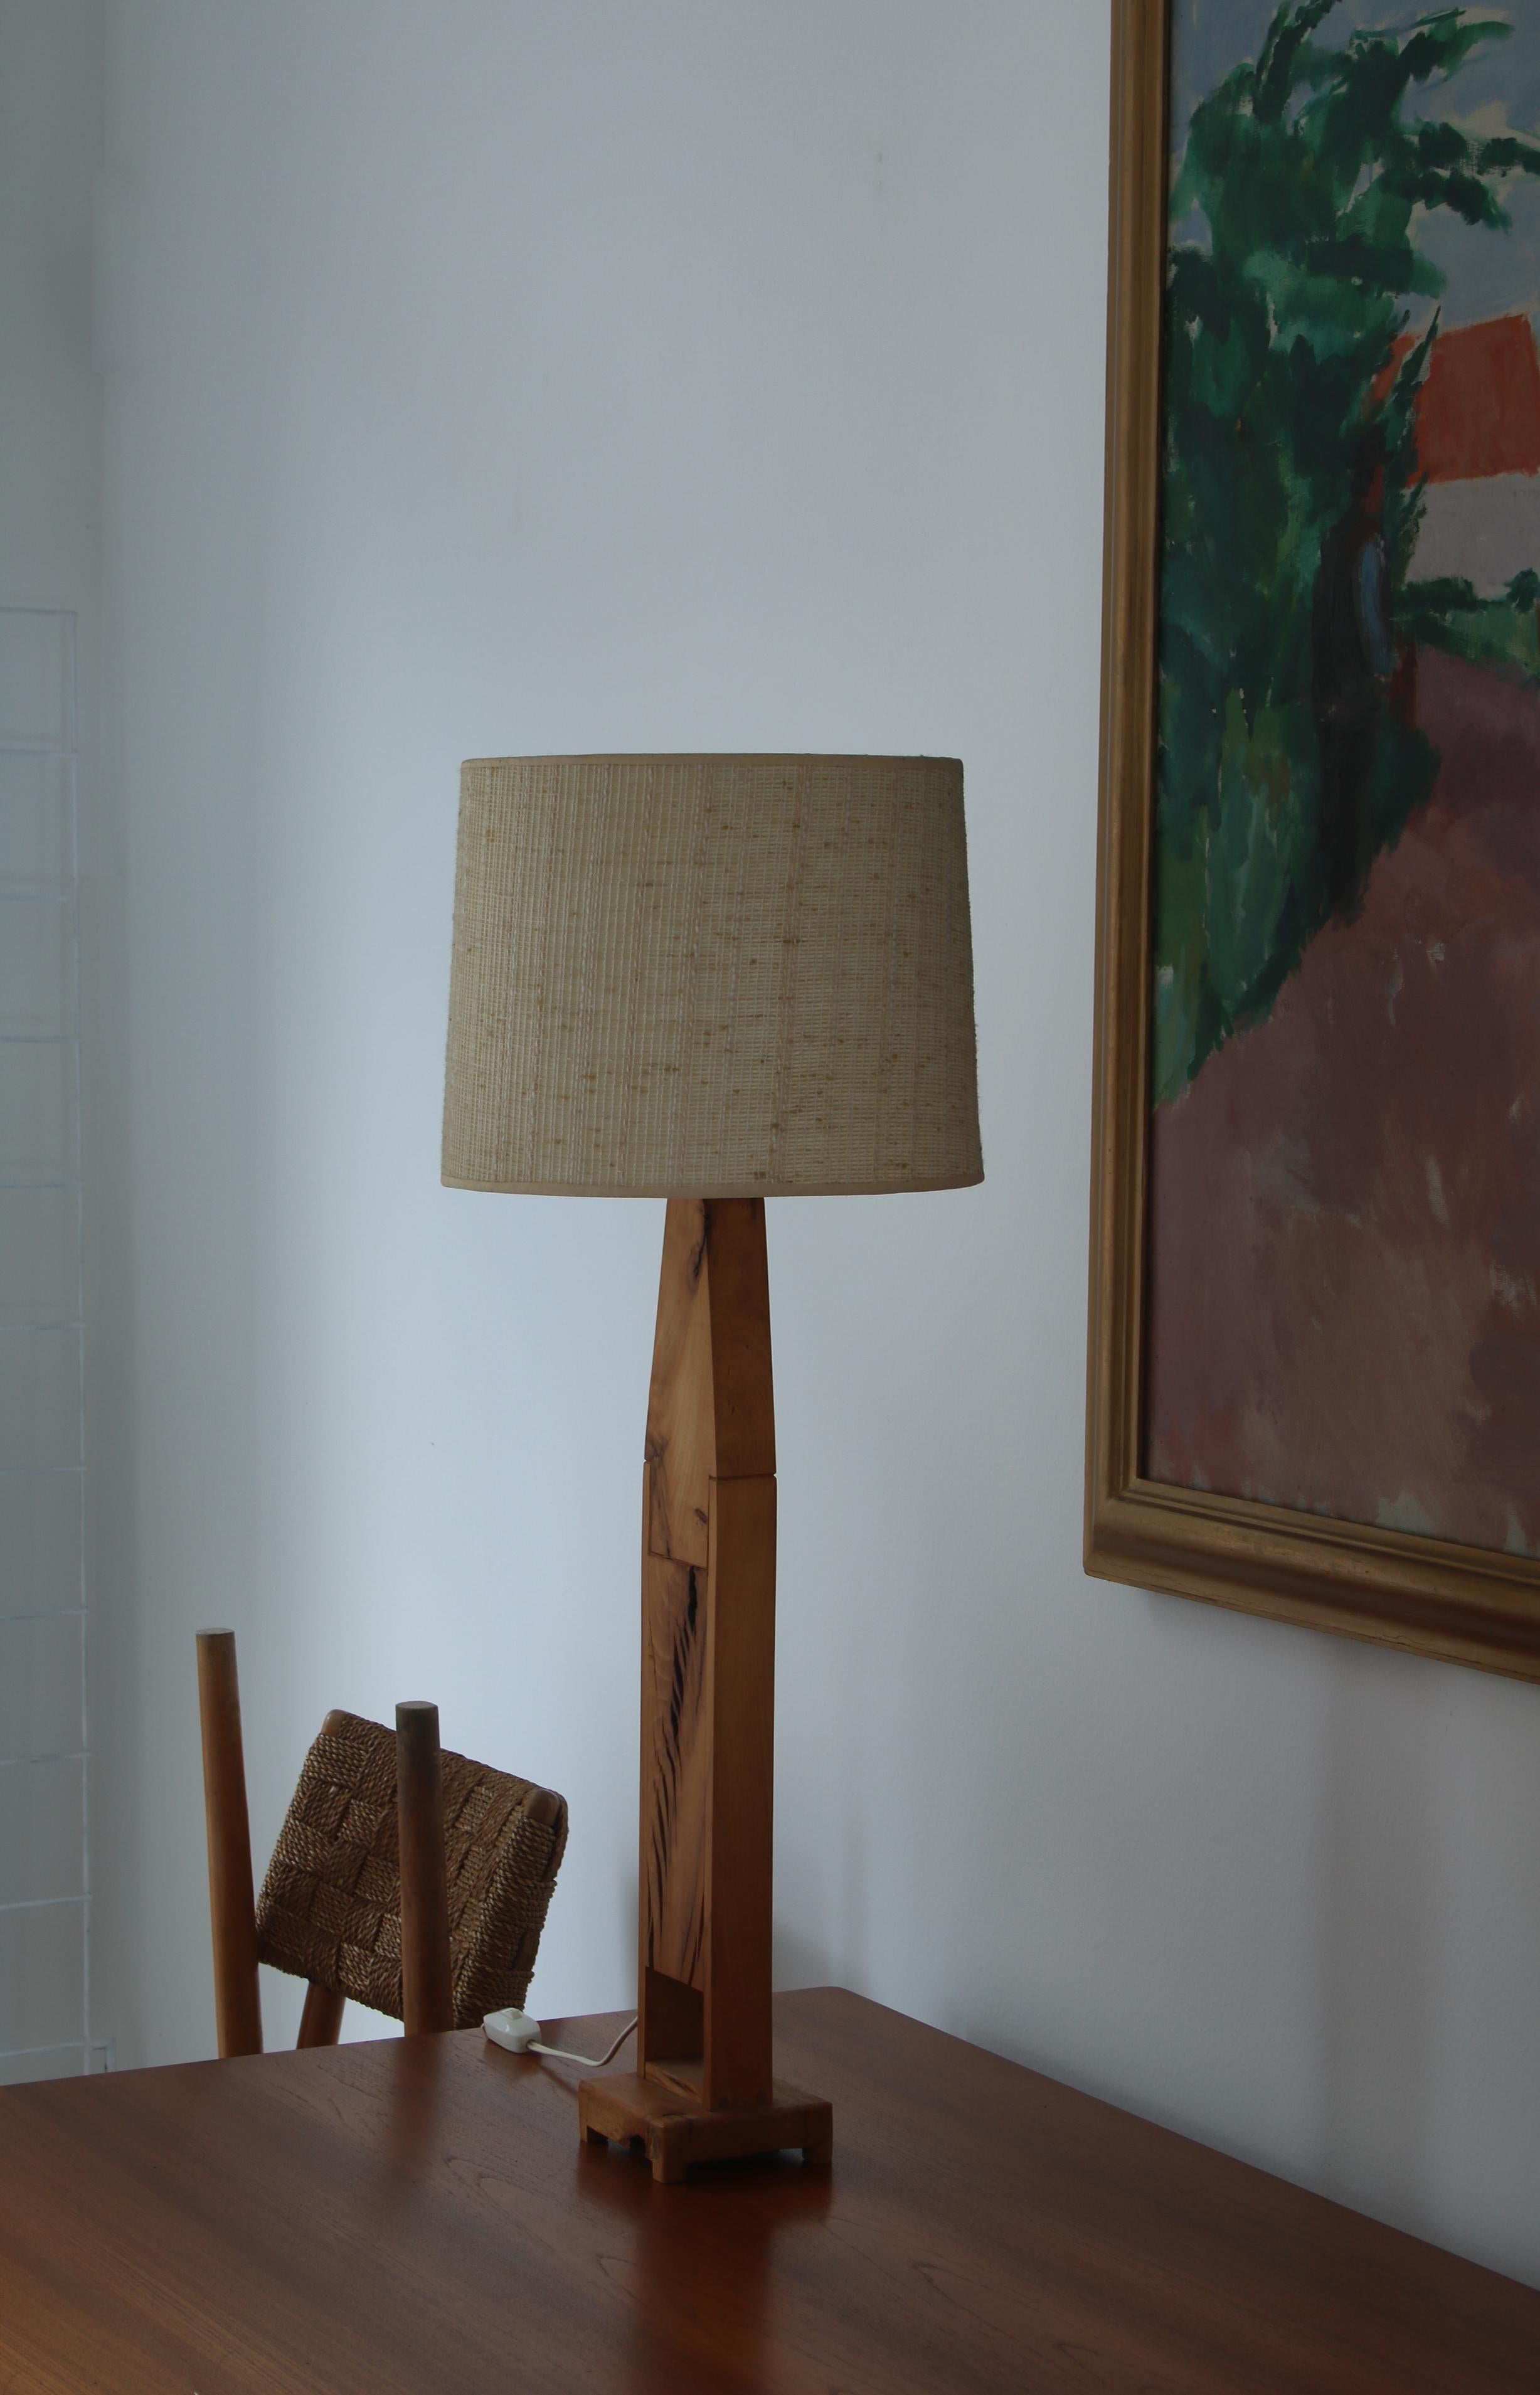 Unique Pinewood Table Lamp with Original Shade, Scandinavia, 1970s For Sale 3